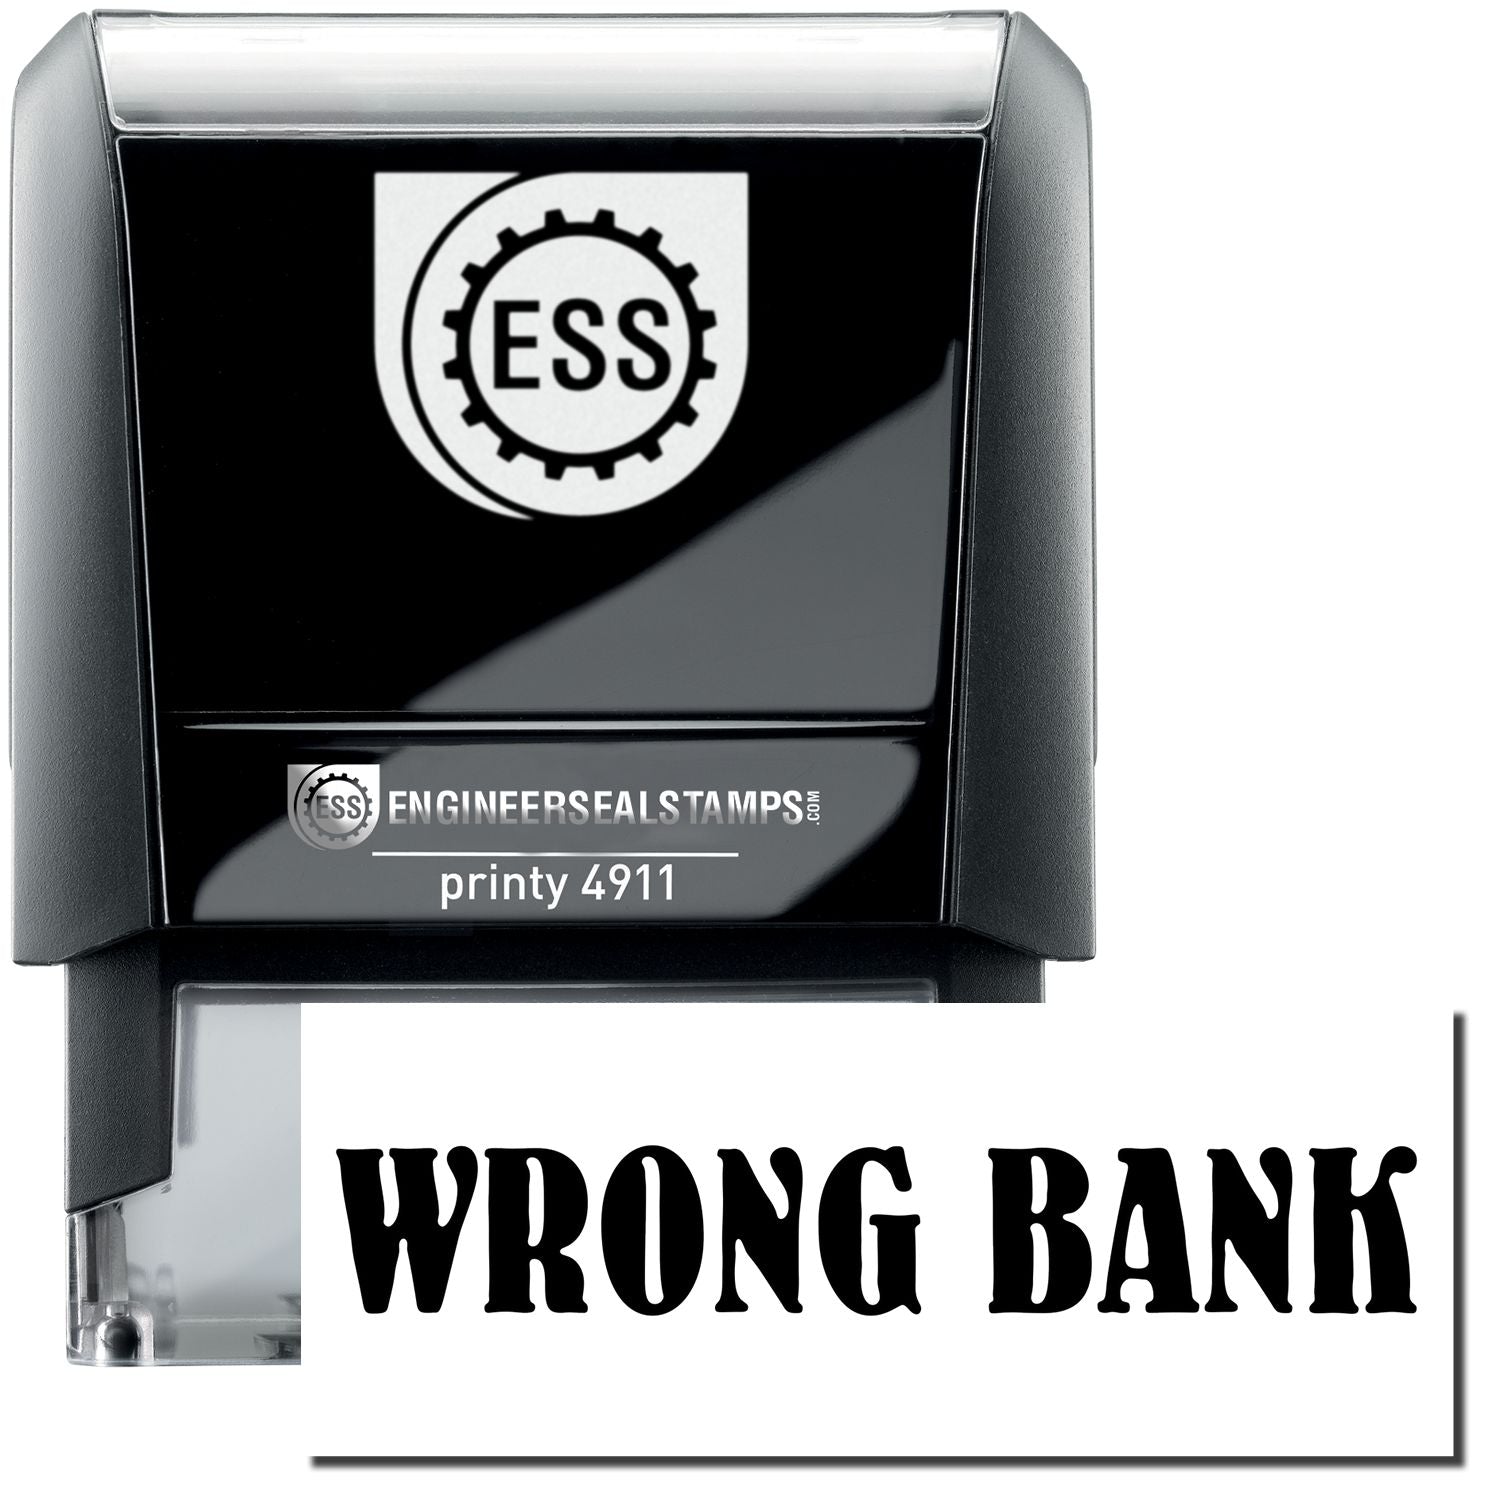 A self-inking stamp with a stamped image showing how the text "WRONG BANK" is displayed after stamping.